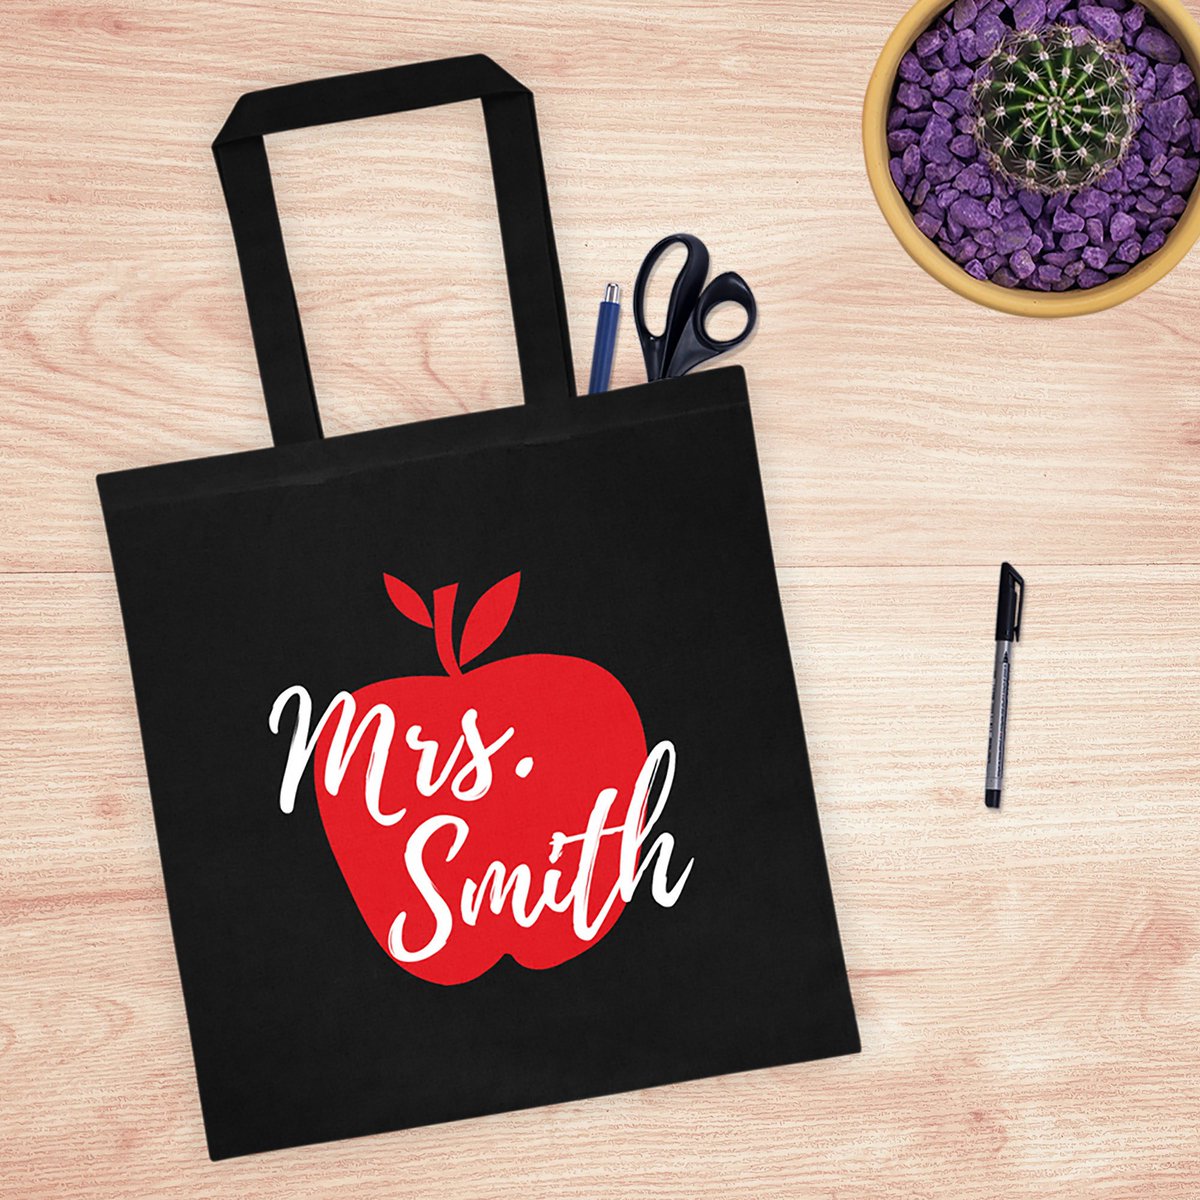 Excited to share the latest addition to my #etsy shop: Personalized Teaching Book Bag Teacher Tote Bag School Tote Bag Apple Tote Bag etsy.me/2XOhANq #bagsandpurses #red #backtoschool #black #personalizedtotebag #personalizedtote #personalizedbag #teachingbookb